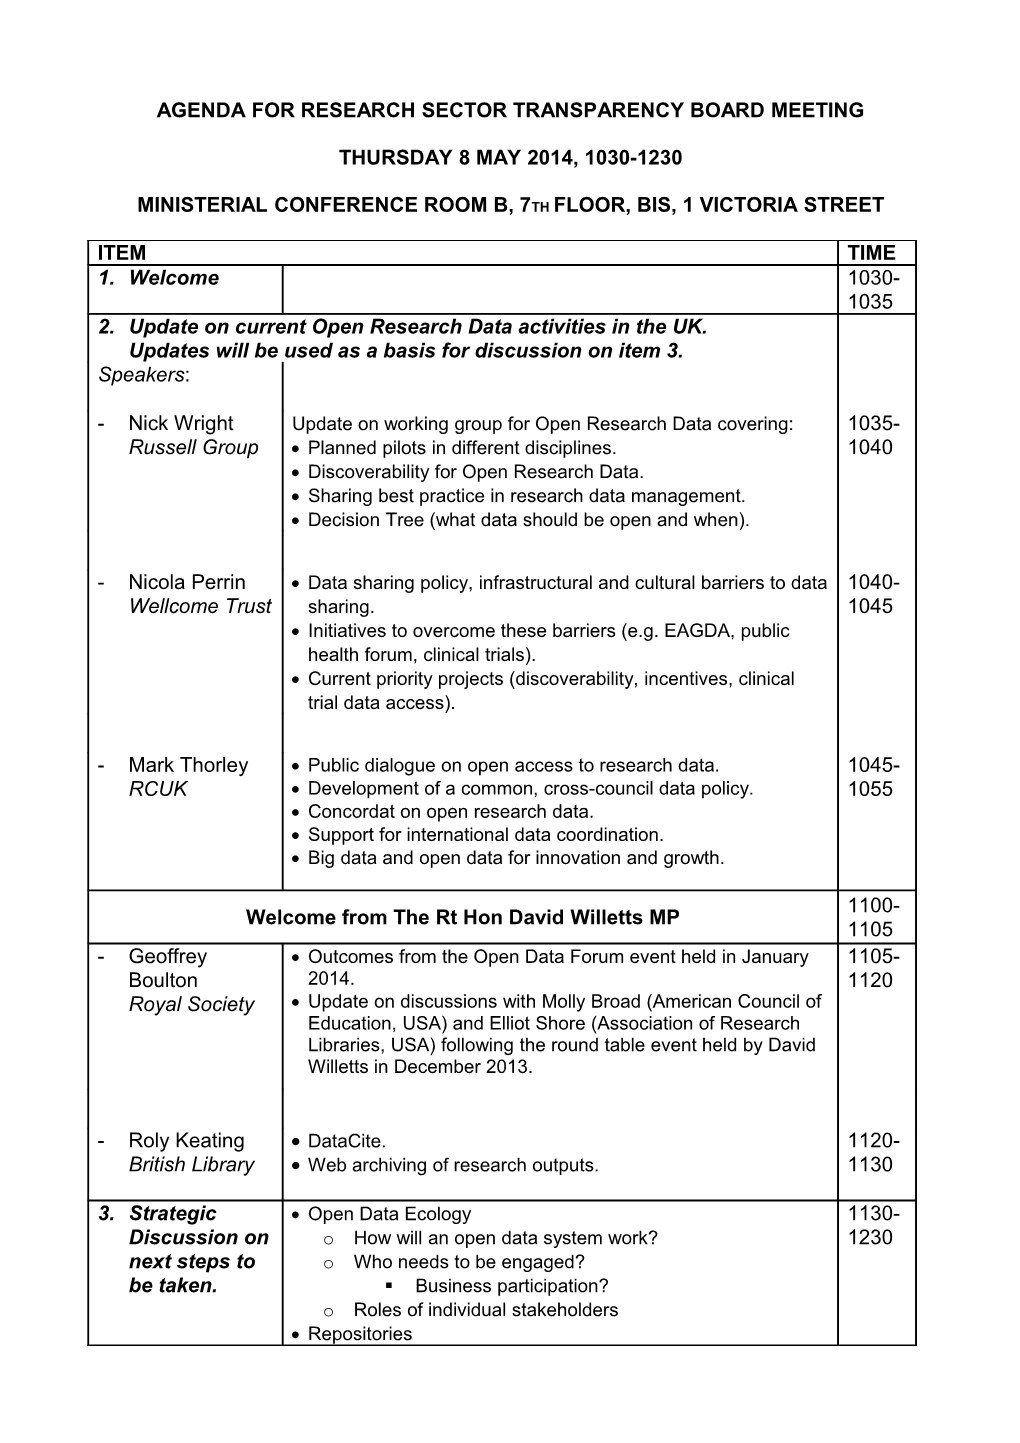 Proposed Agenda for Research Sector Transparency Board Meeting: 8 May 2014, 1030-1230